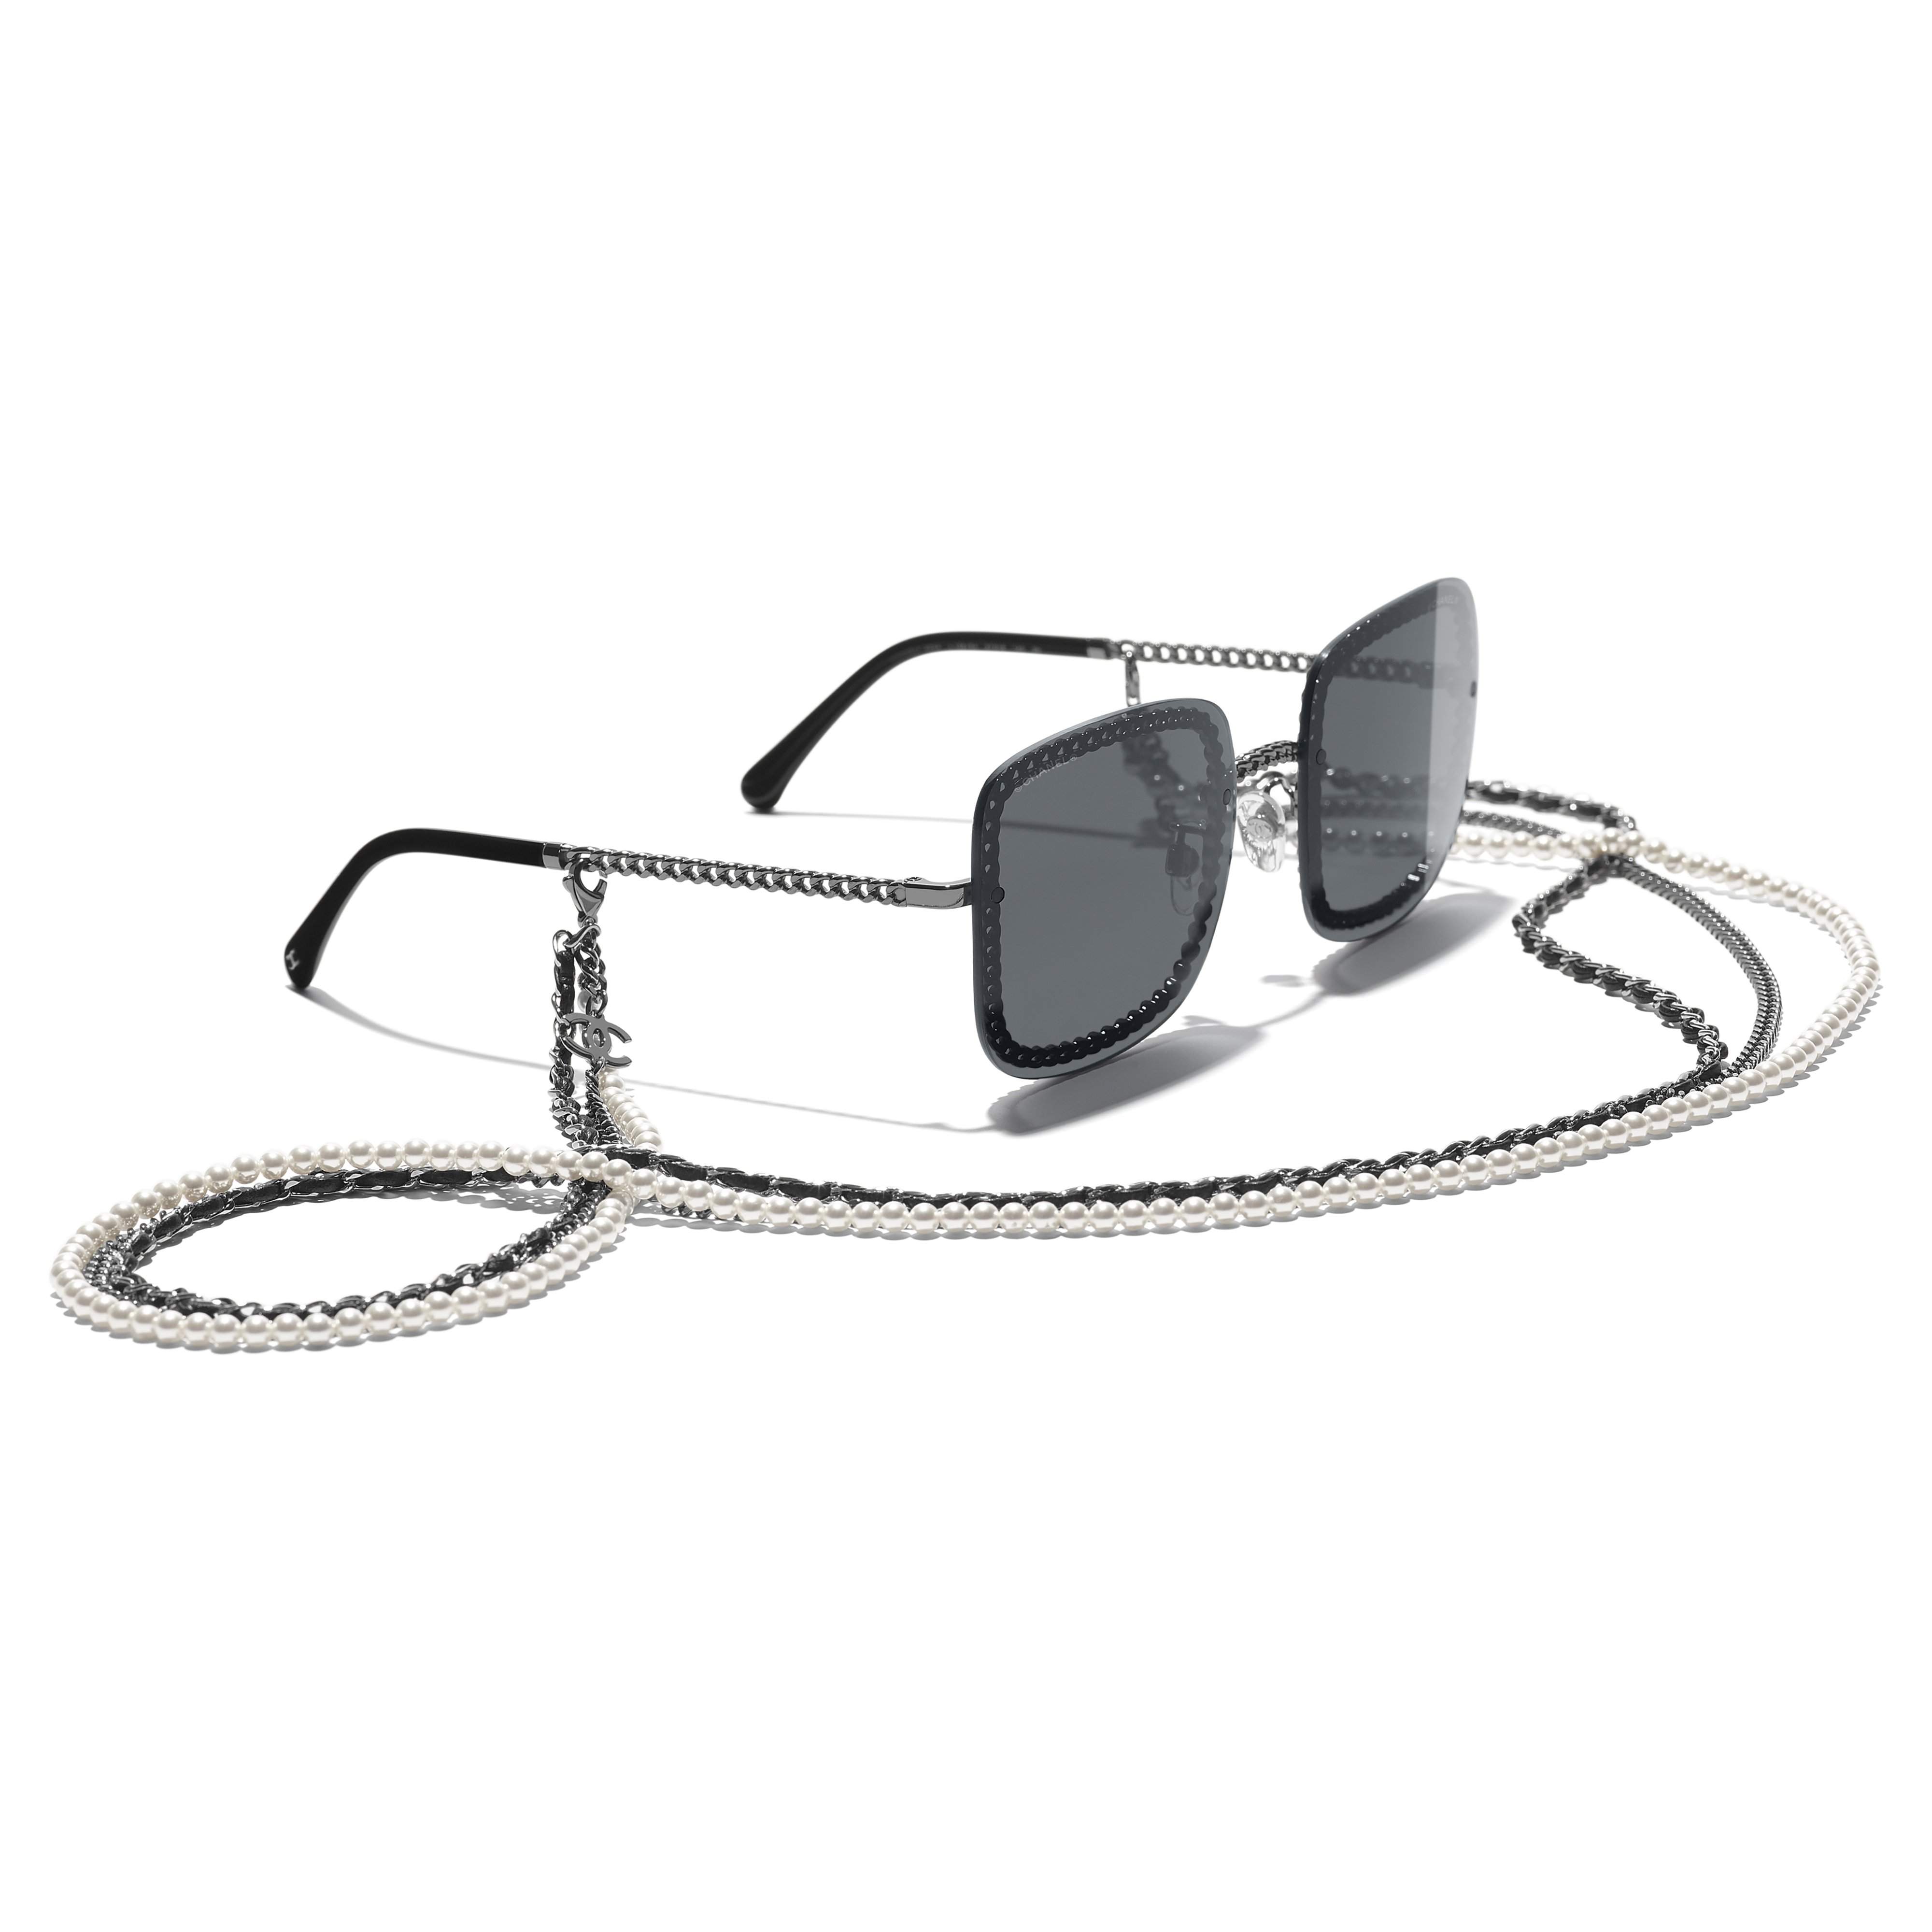 CHANEL SUNGLASSES Black and Silver Metal 4115 c.127/87 Shades